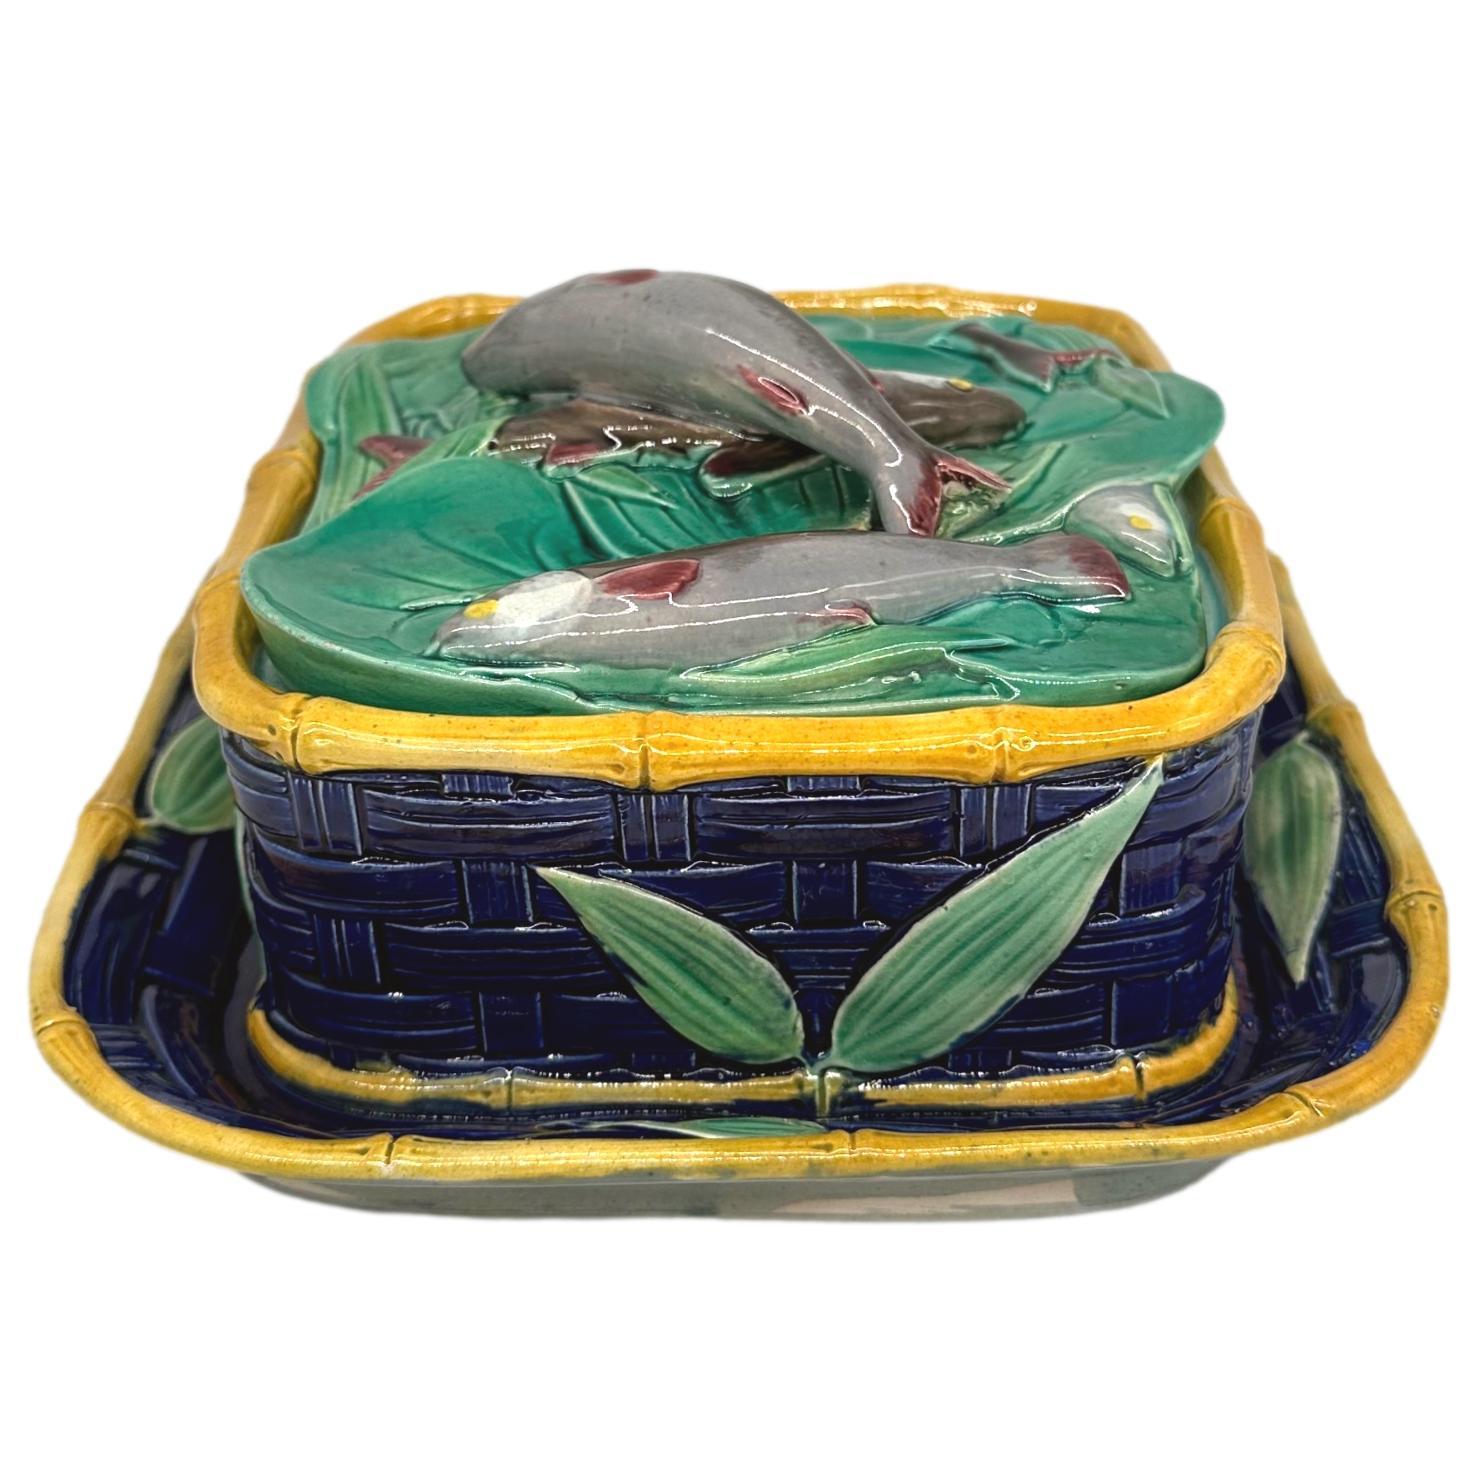 A Victoria Pottery Majolica Cobalt Basketweave Sardine Box, English, ca. 1883 In Good Condition For Sale In Banner Elk, NC